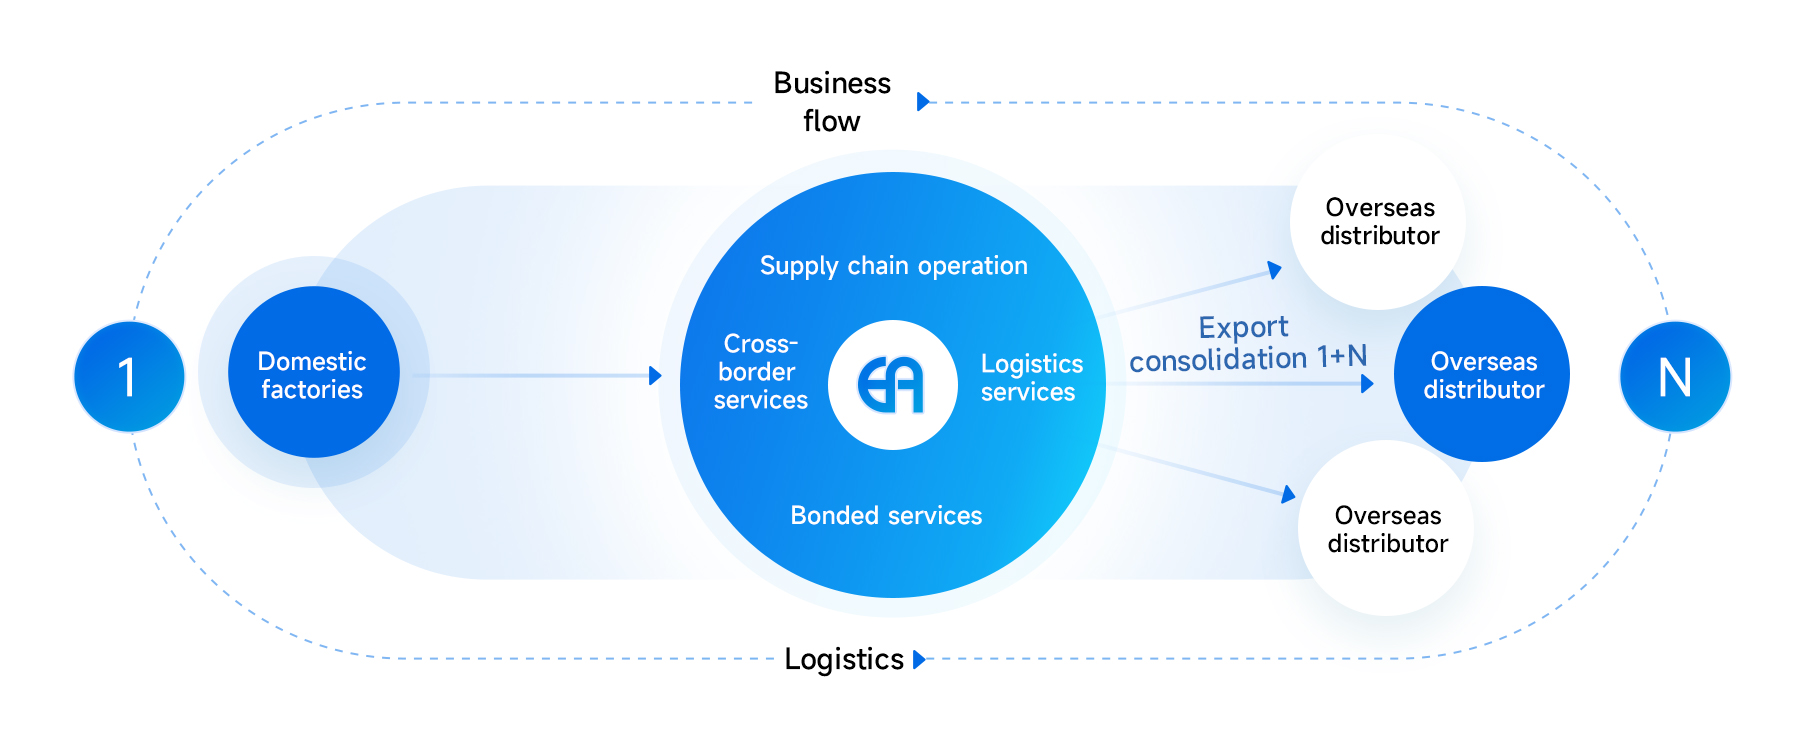 1+N services (export consolidation)